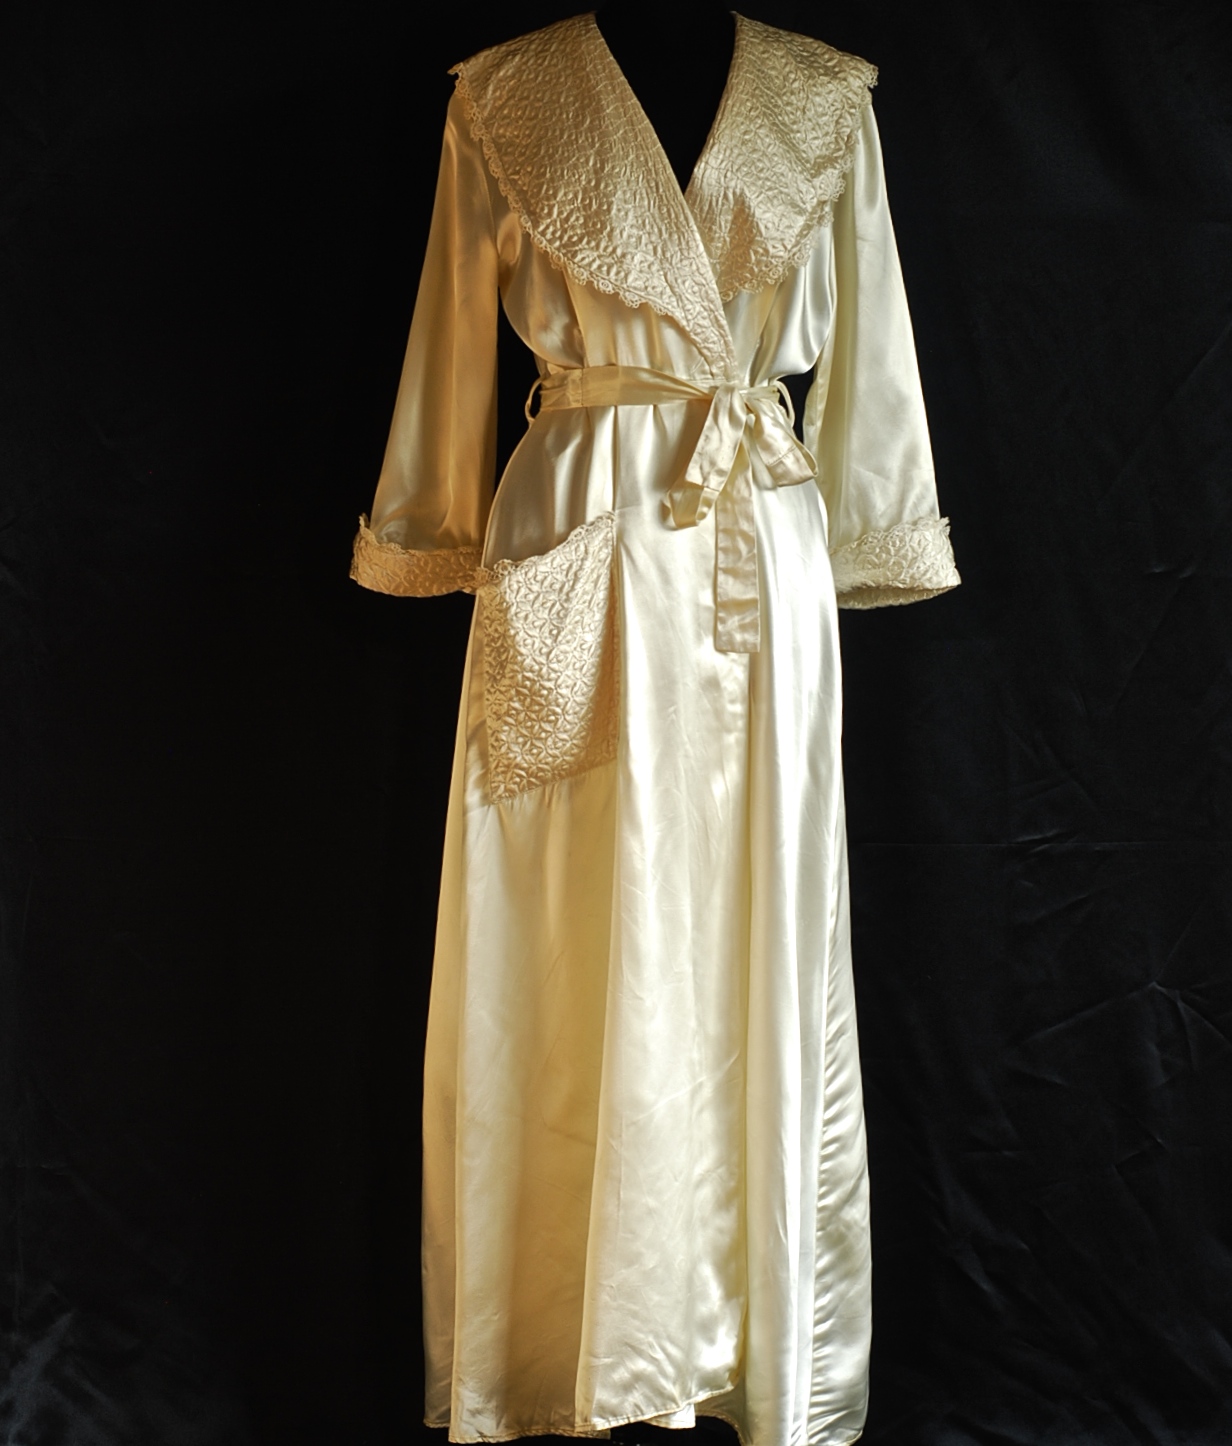 1940’s Satin Robe With Quilted Detail On Lapel, Cuffs & Pocket | QUIET WEST